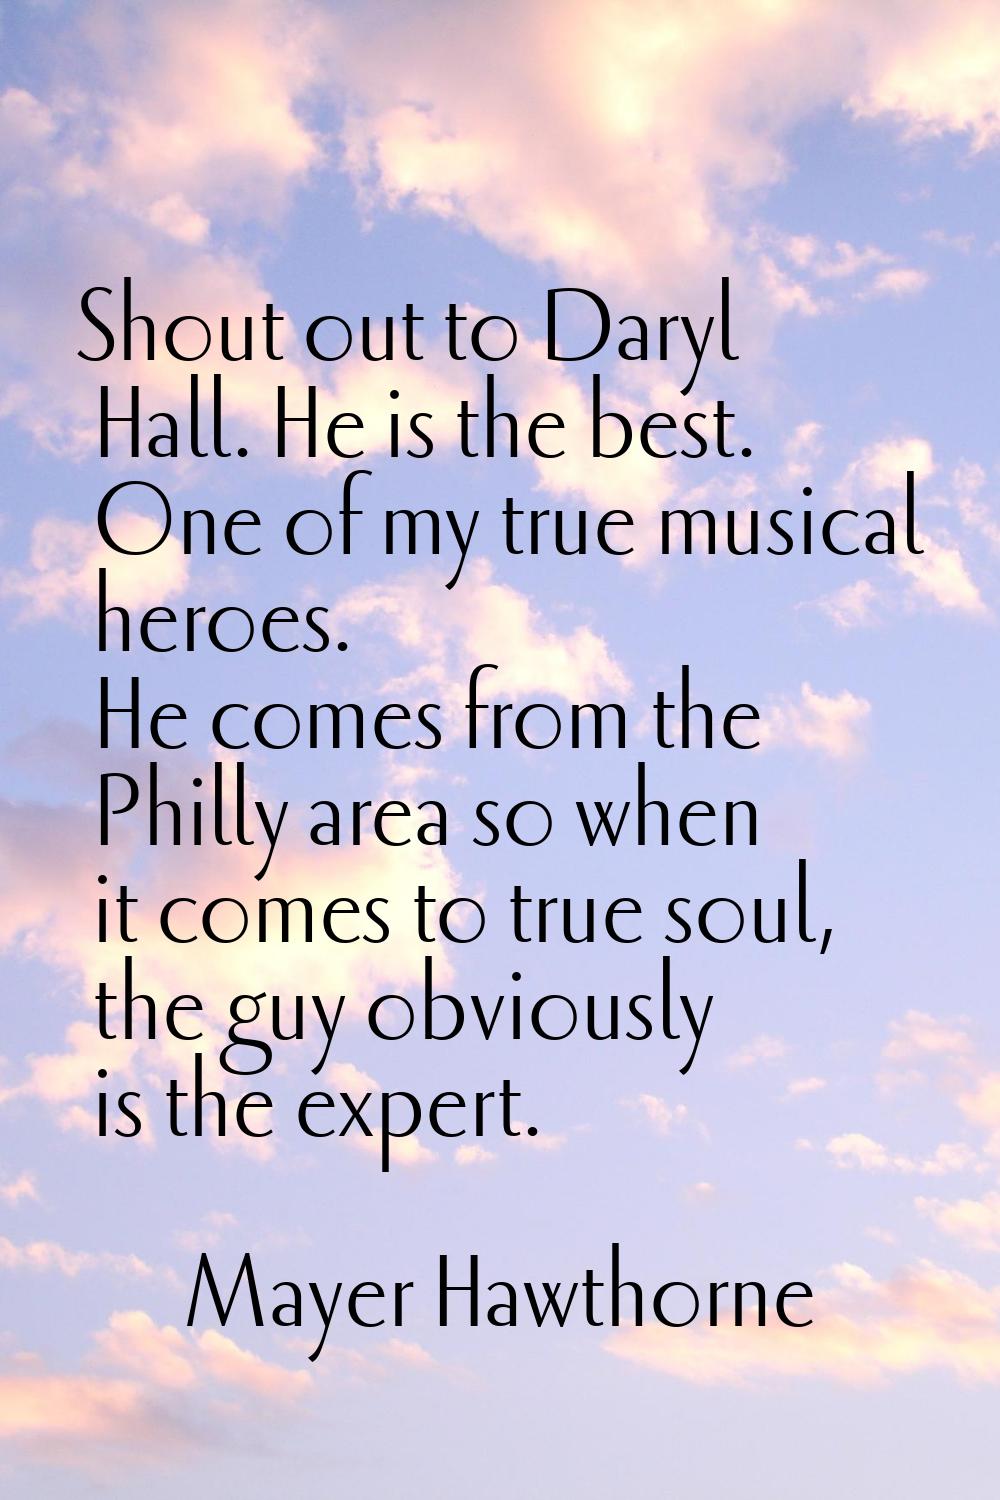 Shout out to Daryl Hall. He is the best. One of my true musical heroes. He comes from the Philly ar